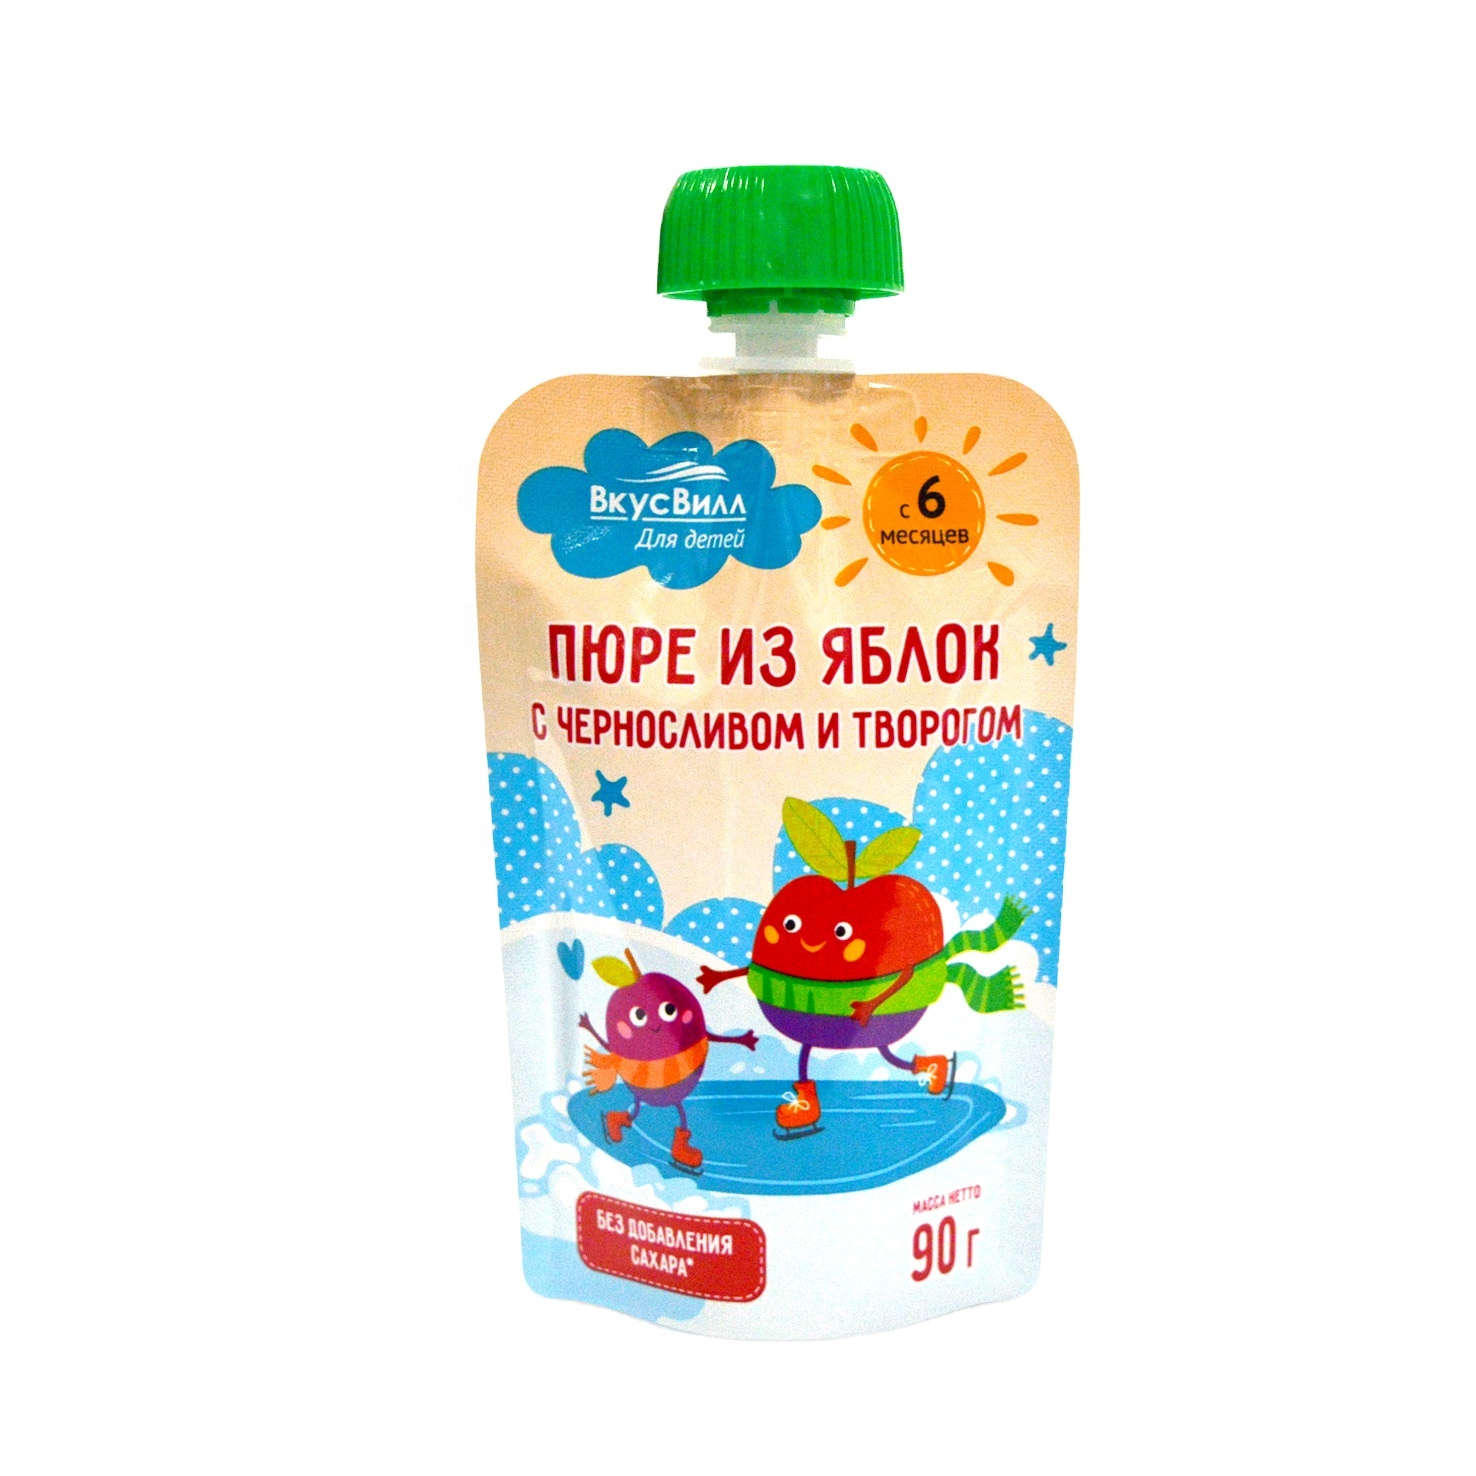 Juicy fruit edibles plastic bag for packaging reusable squeeze baby drinks food pouches packaged baby food pouch